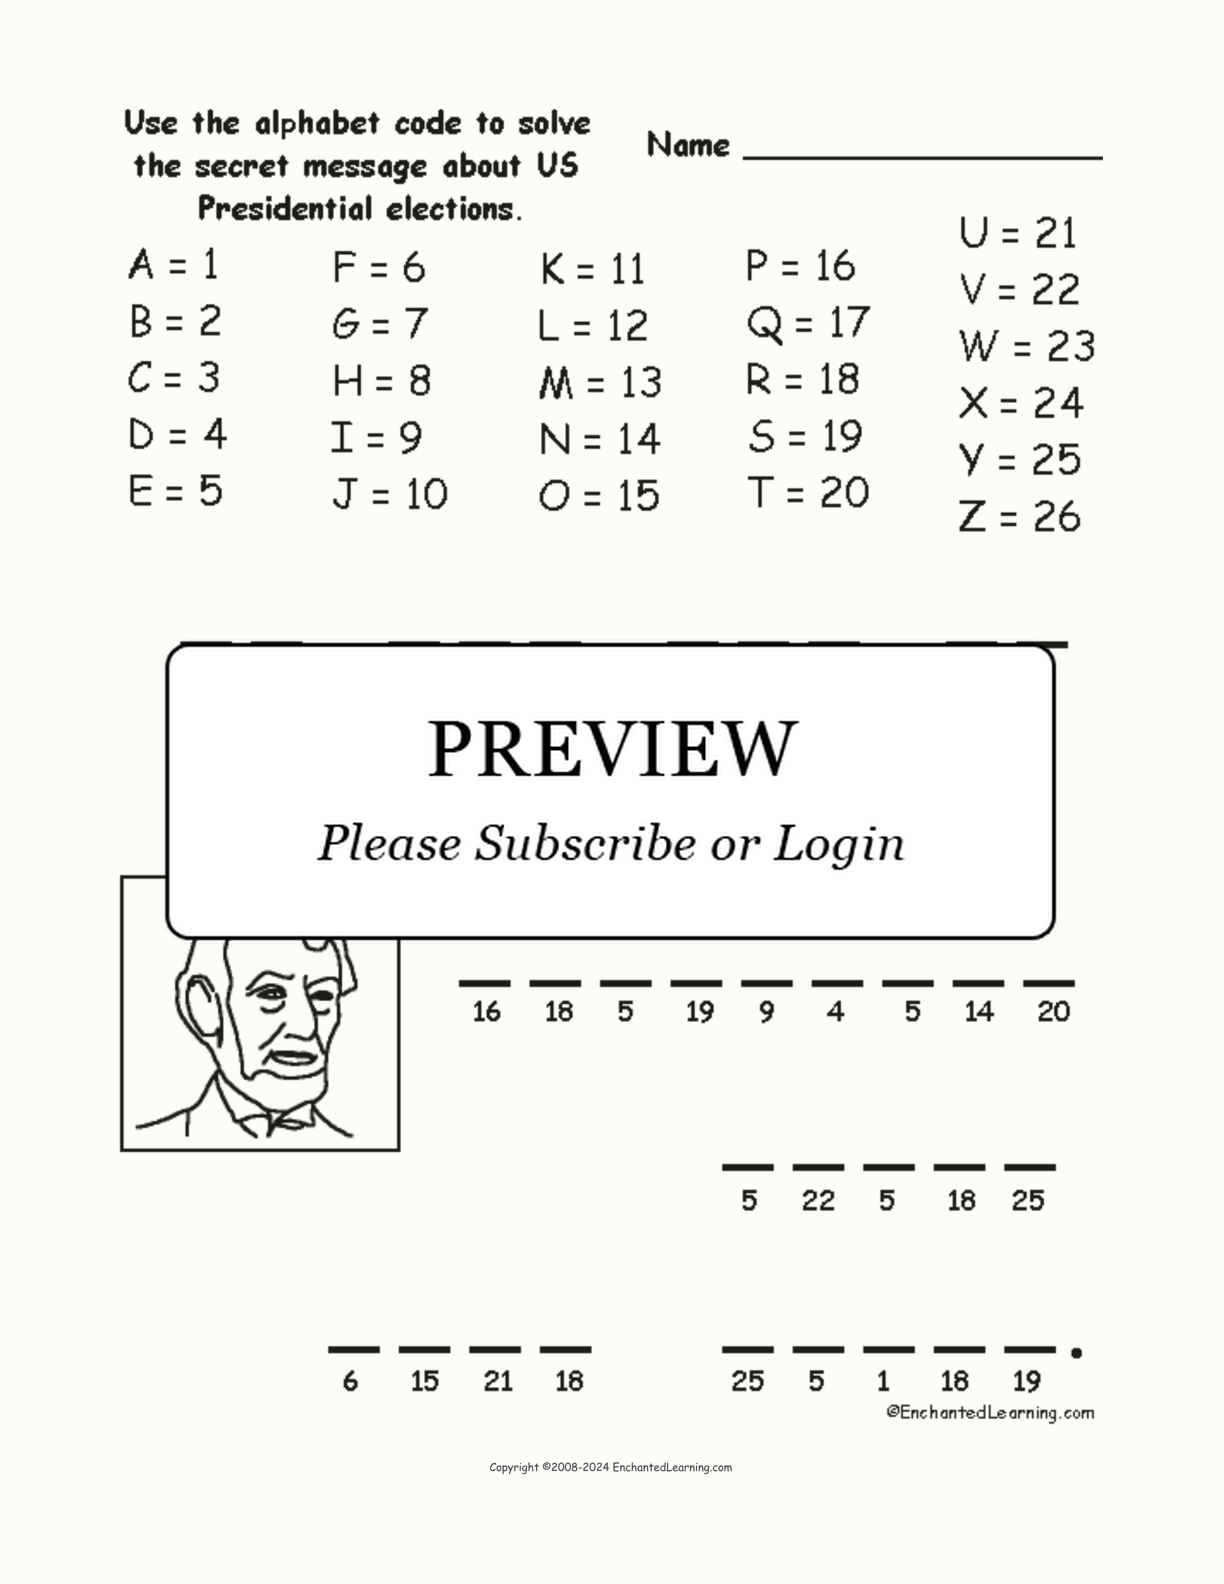 Presidential Election Alphabet Code interactive worksheet page 1